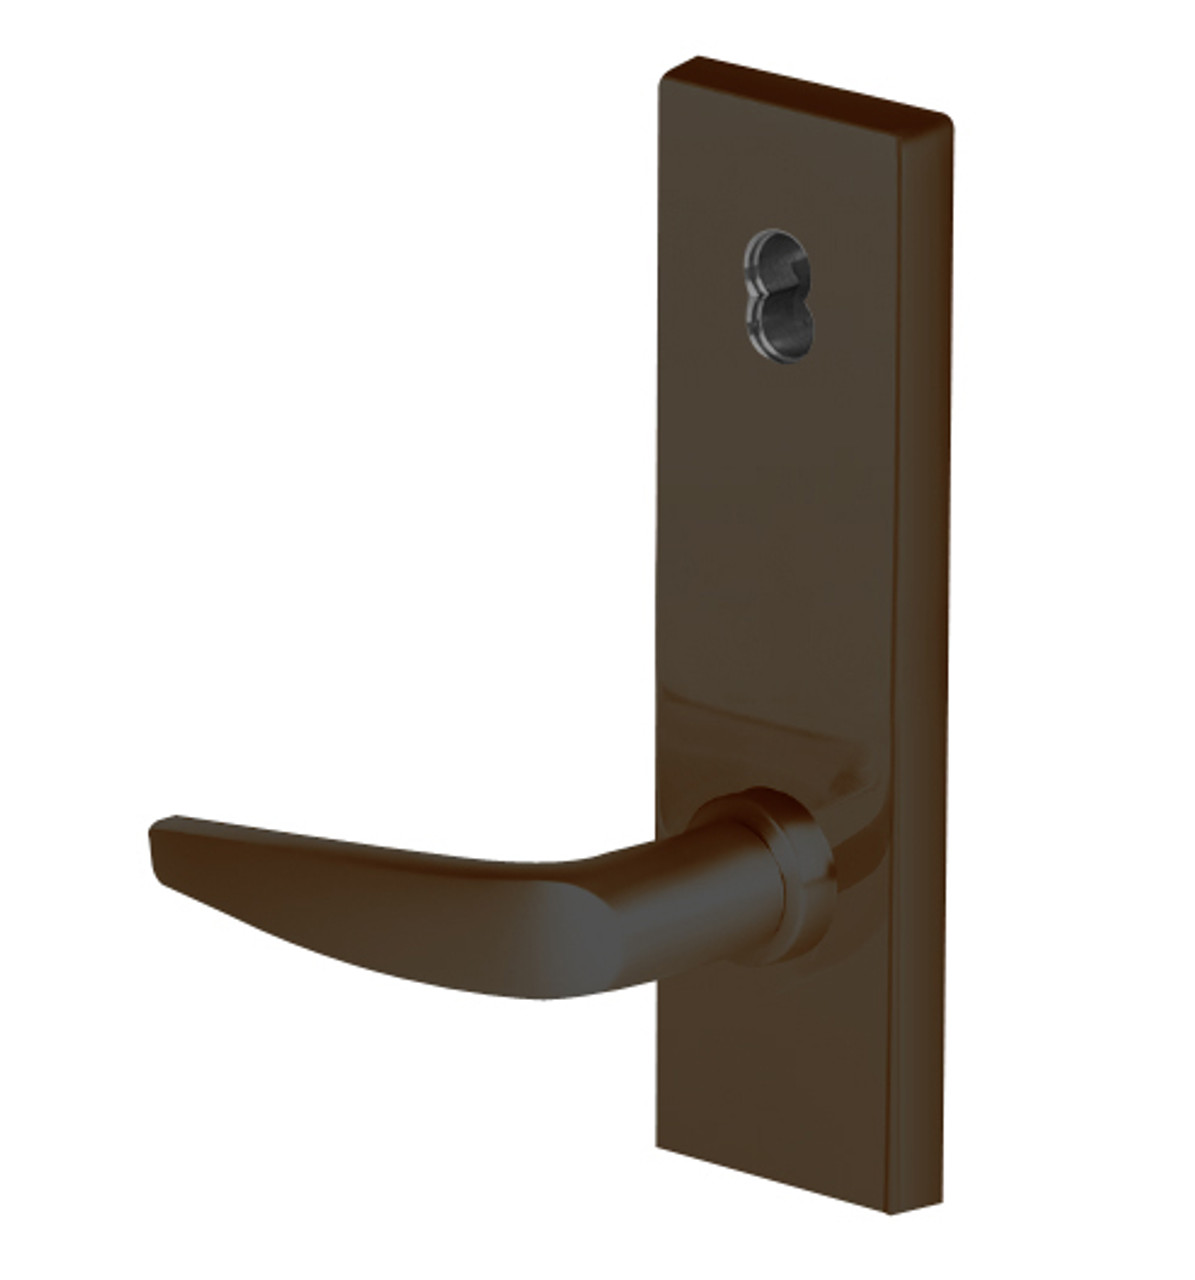 45HW7TWEL16N613 Best 40HW series Double Key Deadbolt Fail Safe Electromechanical Mortise Lever Lock with Curved w/ No Return Style in Oil Rubbed Bronze